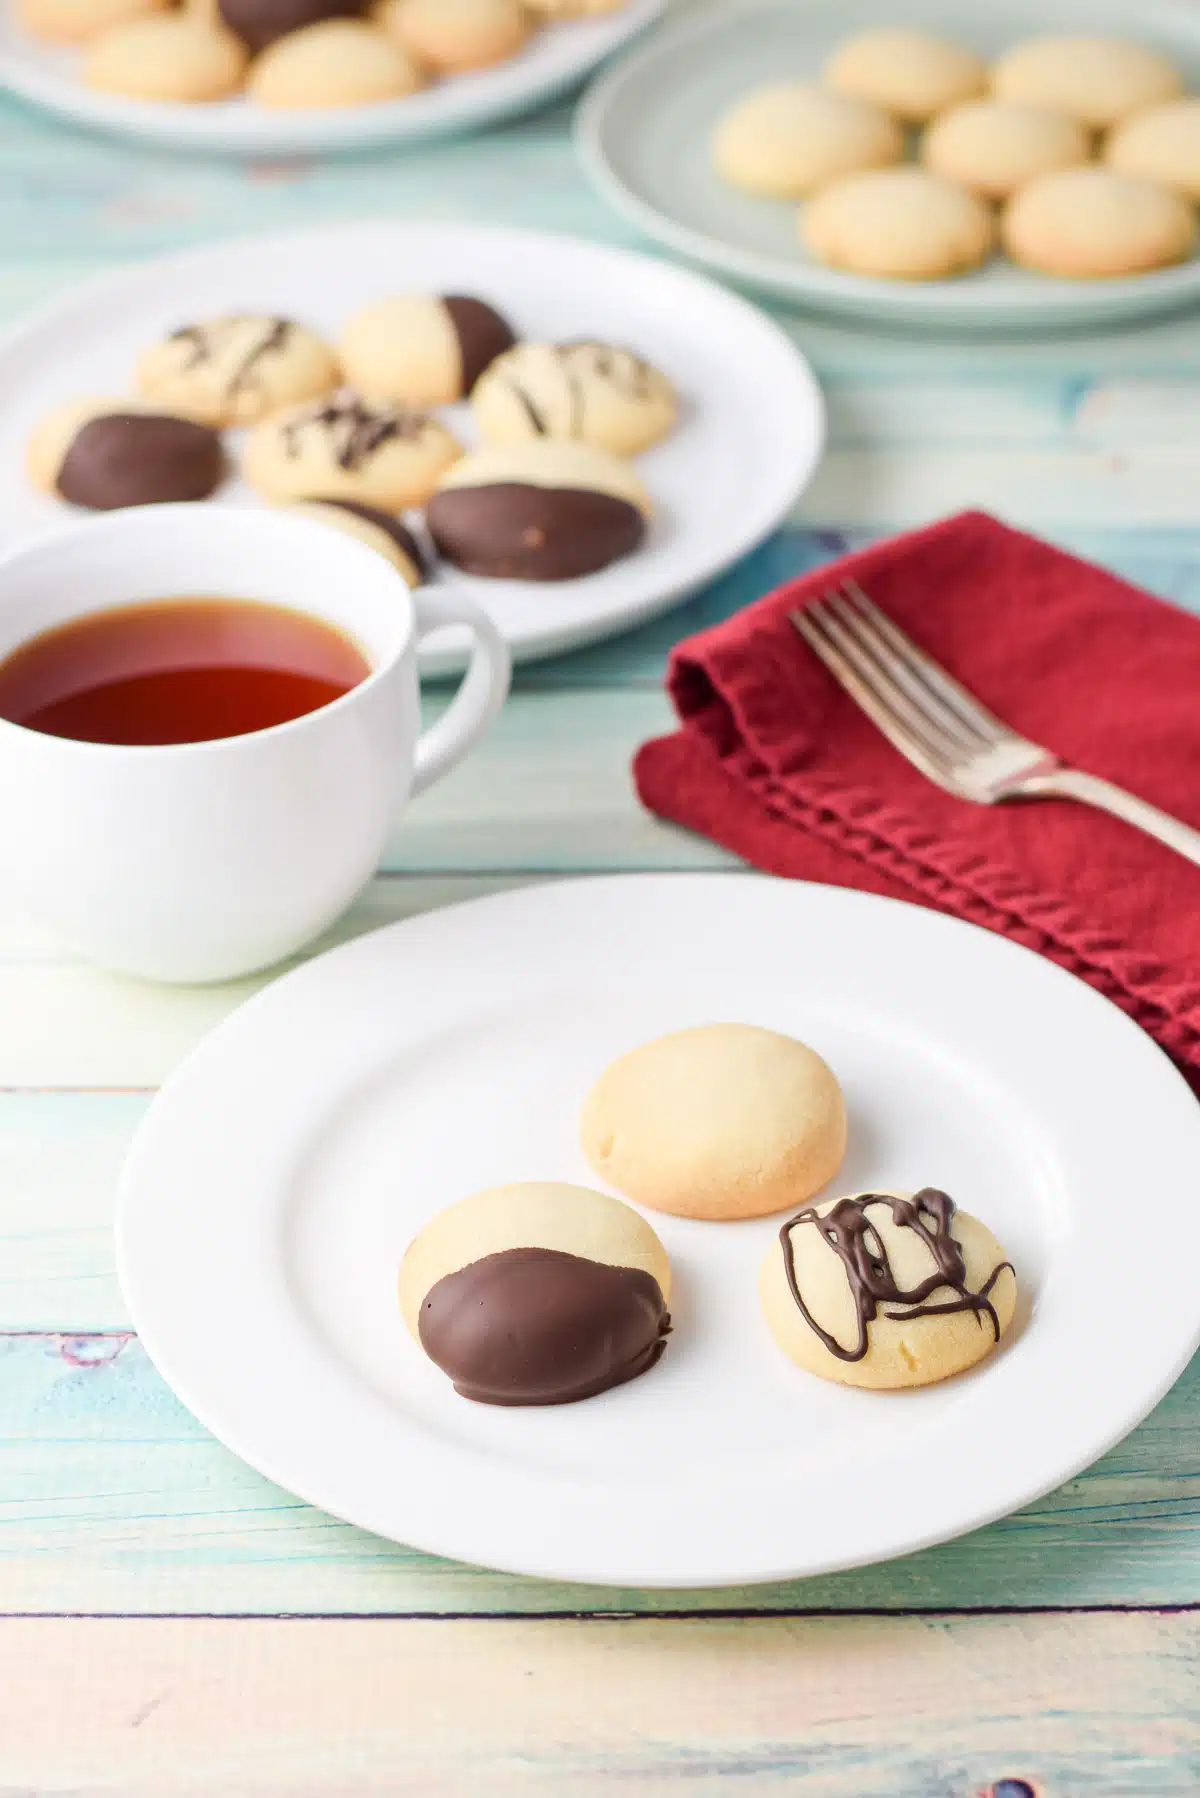 A few plates with shortbread cookies on it, both dipped and plain along with a cup of tea, napkin and fork